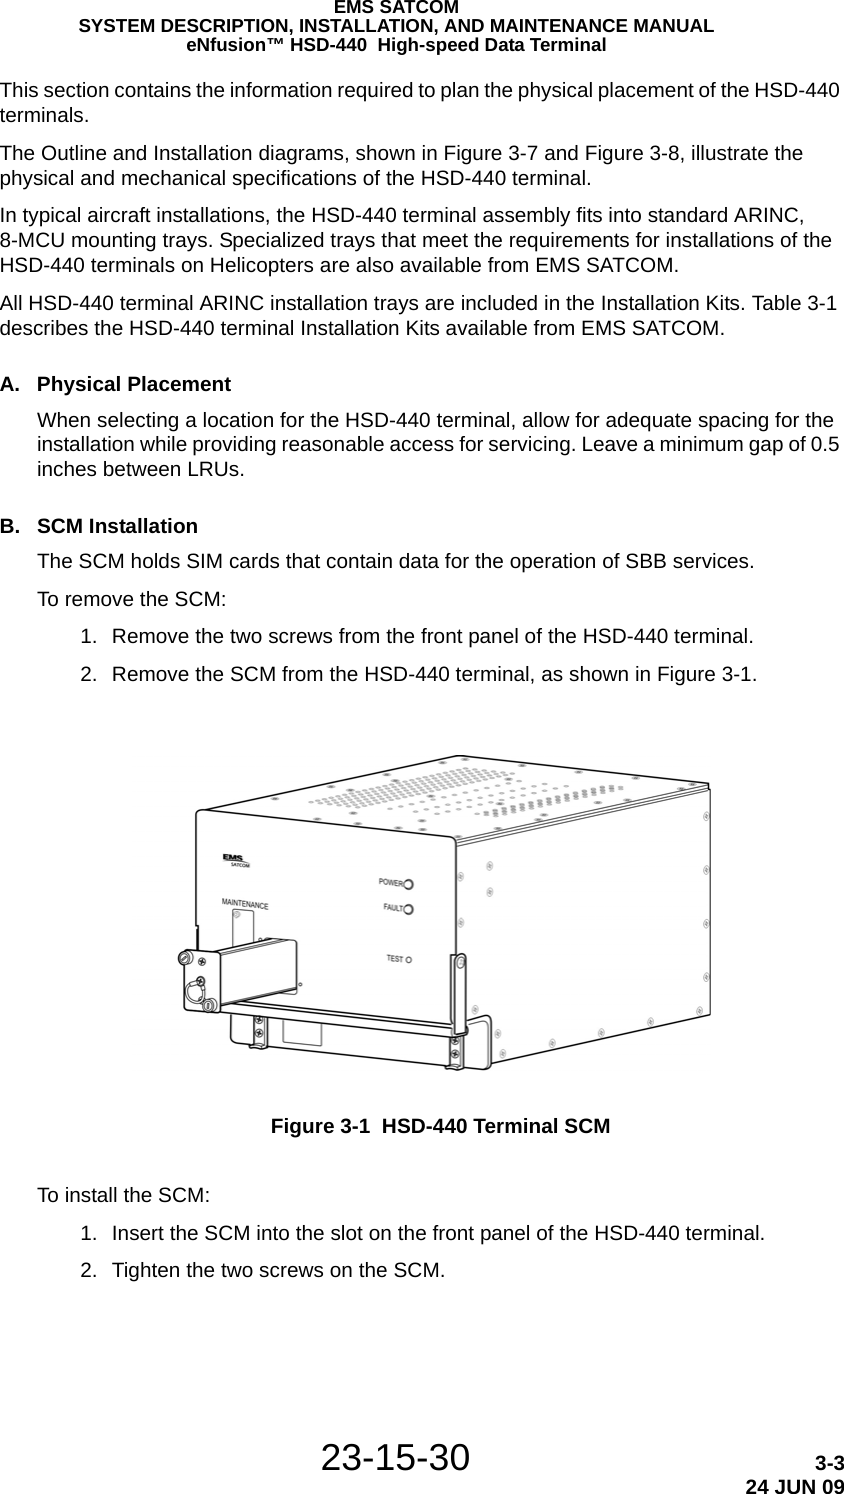 EMS SATCOMSYSTEM DESCRIPTION, INSTALLATION, AND MAINTENANCE MANUALeNfusion™ HSD-440  High-speed Data Terminal23-15-30 3-324 JUN 09This section contains the information required to plan the physical placement of the HSD-440 terminals. The Outline and Installation diagrams, shown in Figure 3-7 and Figure 3-8, illustrate the physical and mechanical specifications of the HSD-440 terminal.In typical aircraft installations, the HSD-440 terminal assembly fits into standard ARINC, 8-MCU mounting trays. Specialized trays that meet the requirements for installations of the HSD-440 terminals on Helicopters are also available from EMS SATCOM. All HSD-440 terminal ARINC installation trays are included in the Installation Kits. Table 3-1 describes the HSD-440 terminal Installation Kits available from EMS SATCOM.A. Physical PlacementWhen selecting a location for the HSD-440 terminal, allow for adequate spacing for the installation while providing reasonable access for servicing. Leave a minimum gap of 0.5 inches between LRUs.B. SCM InstallationThe SCM holds SIM cards that contain data for the operation of SBB services.To remove the SCM: 1. Remove the two screws from the front panel of the HSD-440 terminal. 2. Remove the SCM from the HSD-440 terminal, as shown in Figure 3-1.Figure 3-1  HSD-440 Terminal SCMTo install the SCM: 1. Insert the SCM into the slot on the front panel of the HSD-440 terminal. 2. Tighten the two screws on the SCM.